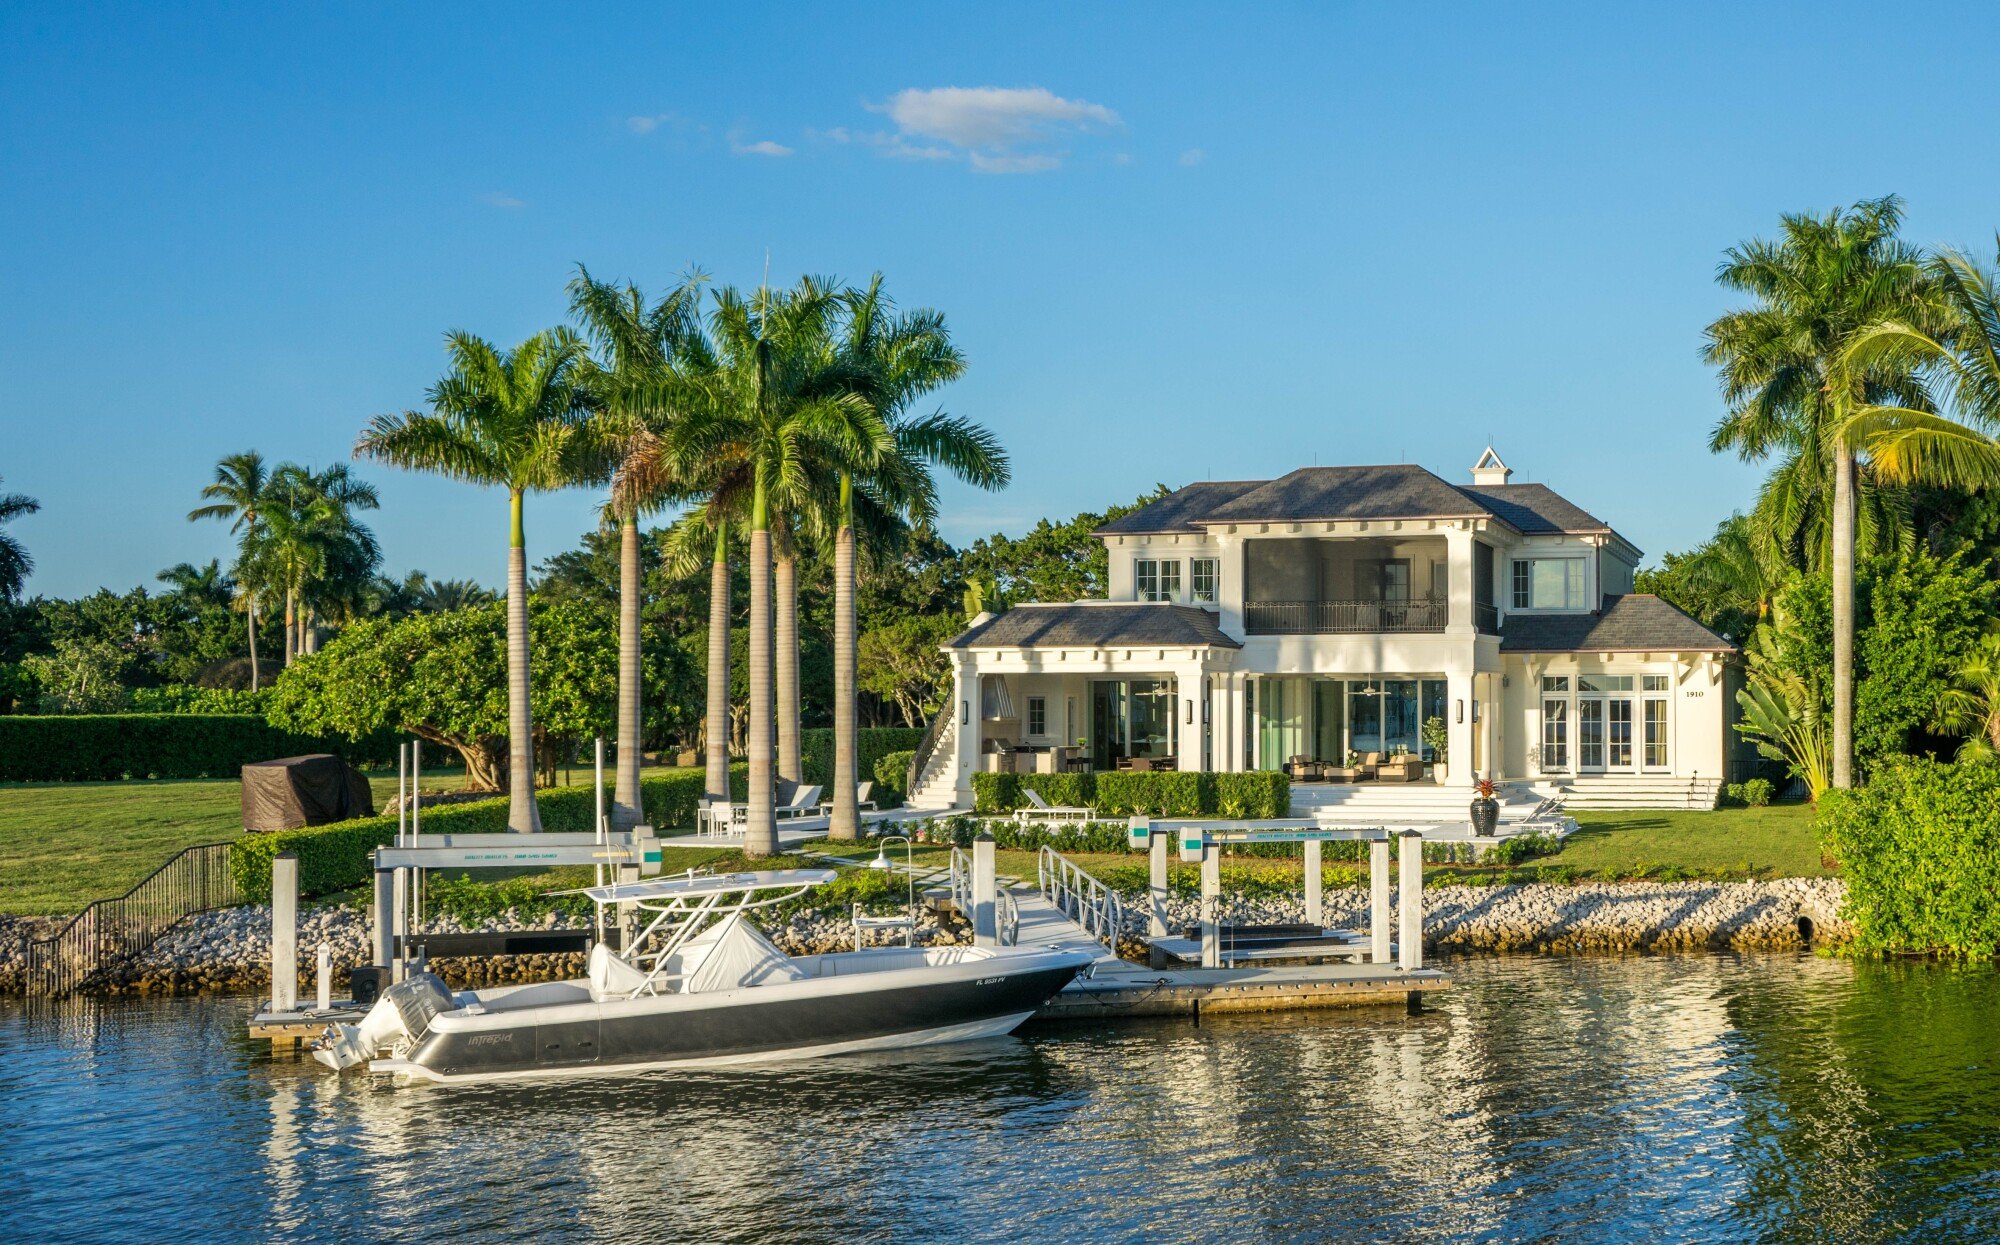 Vacation Rental Property: Tips for Success and Profit in Brandon, FL